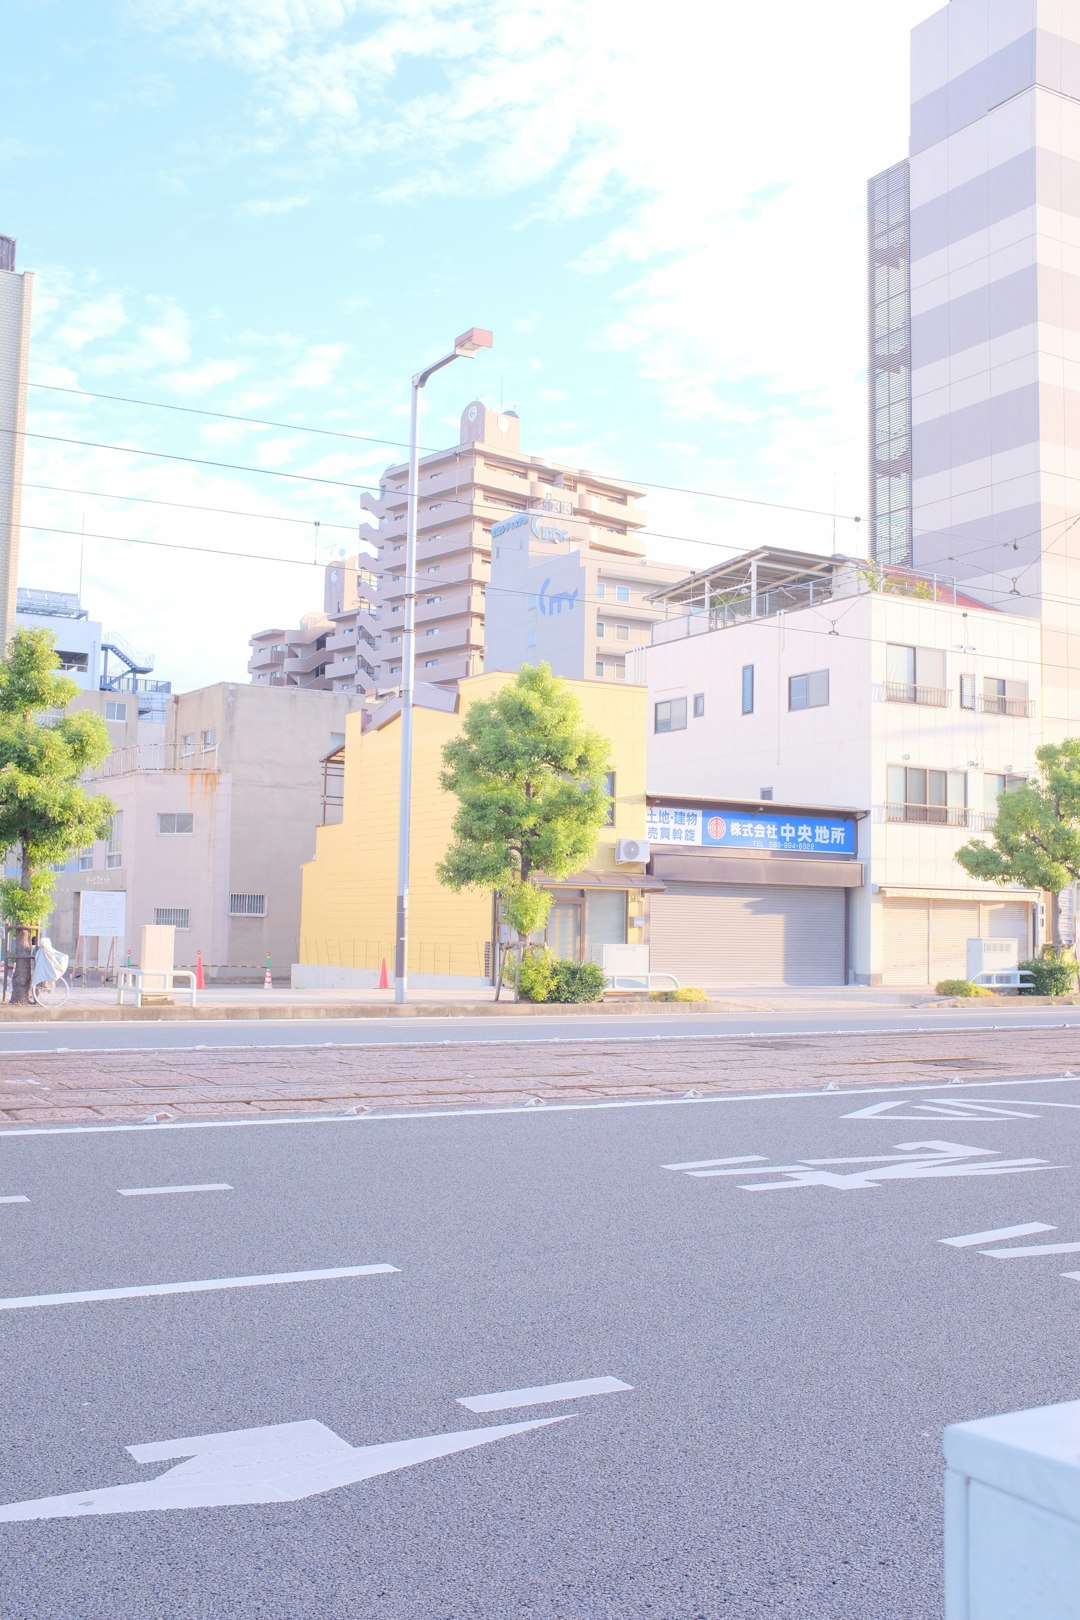 yellow and blue concrete building beside gray asphalt road during daytime